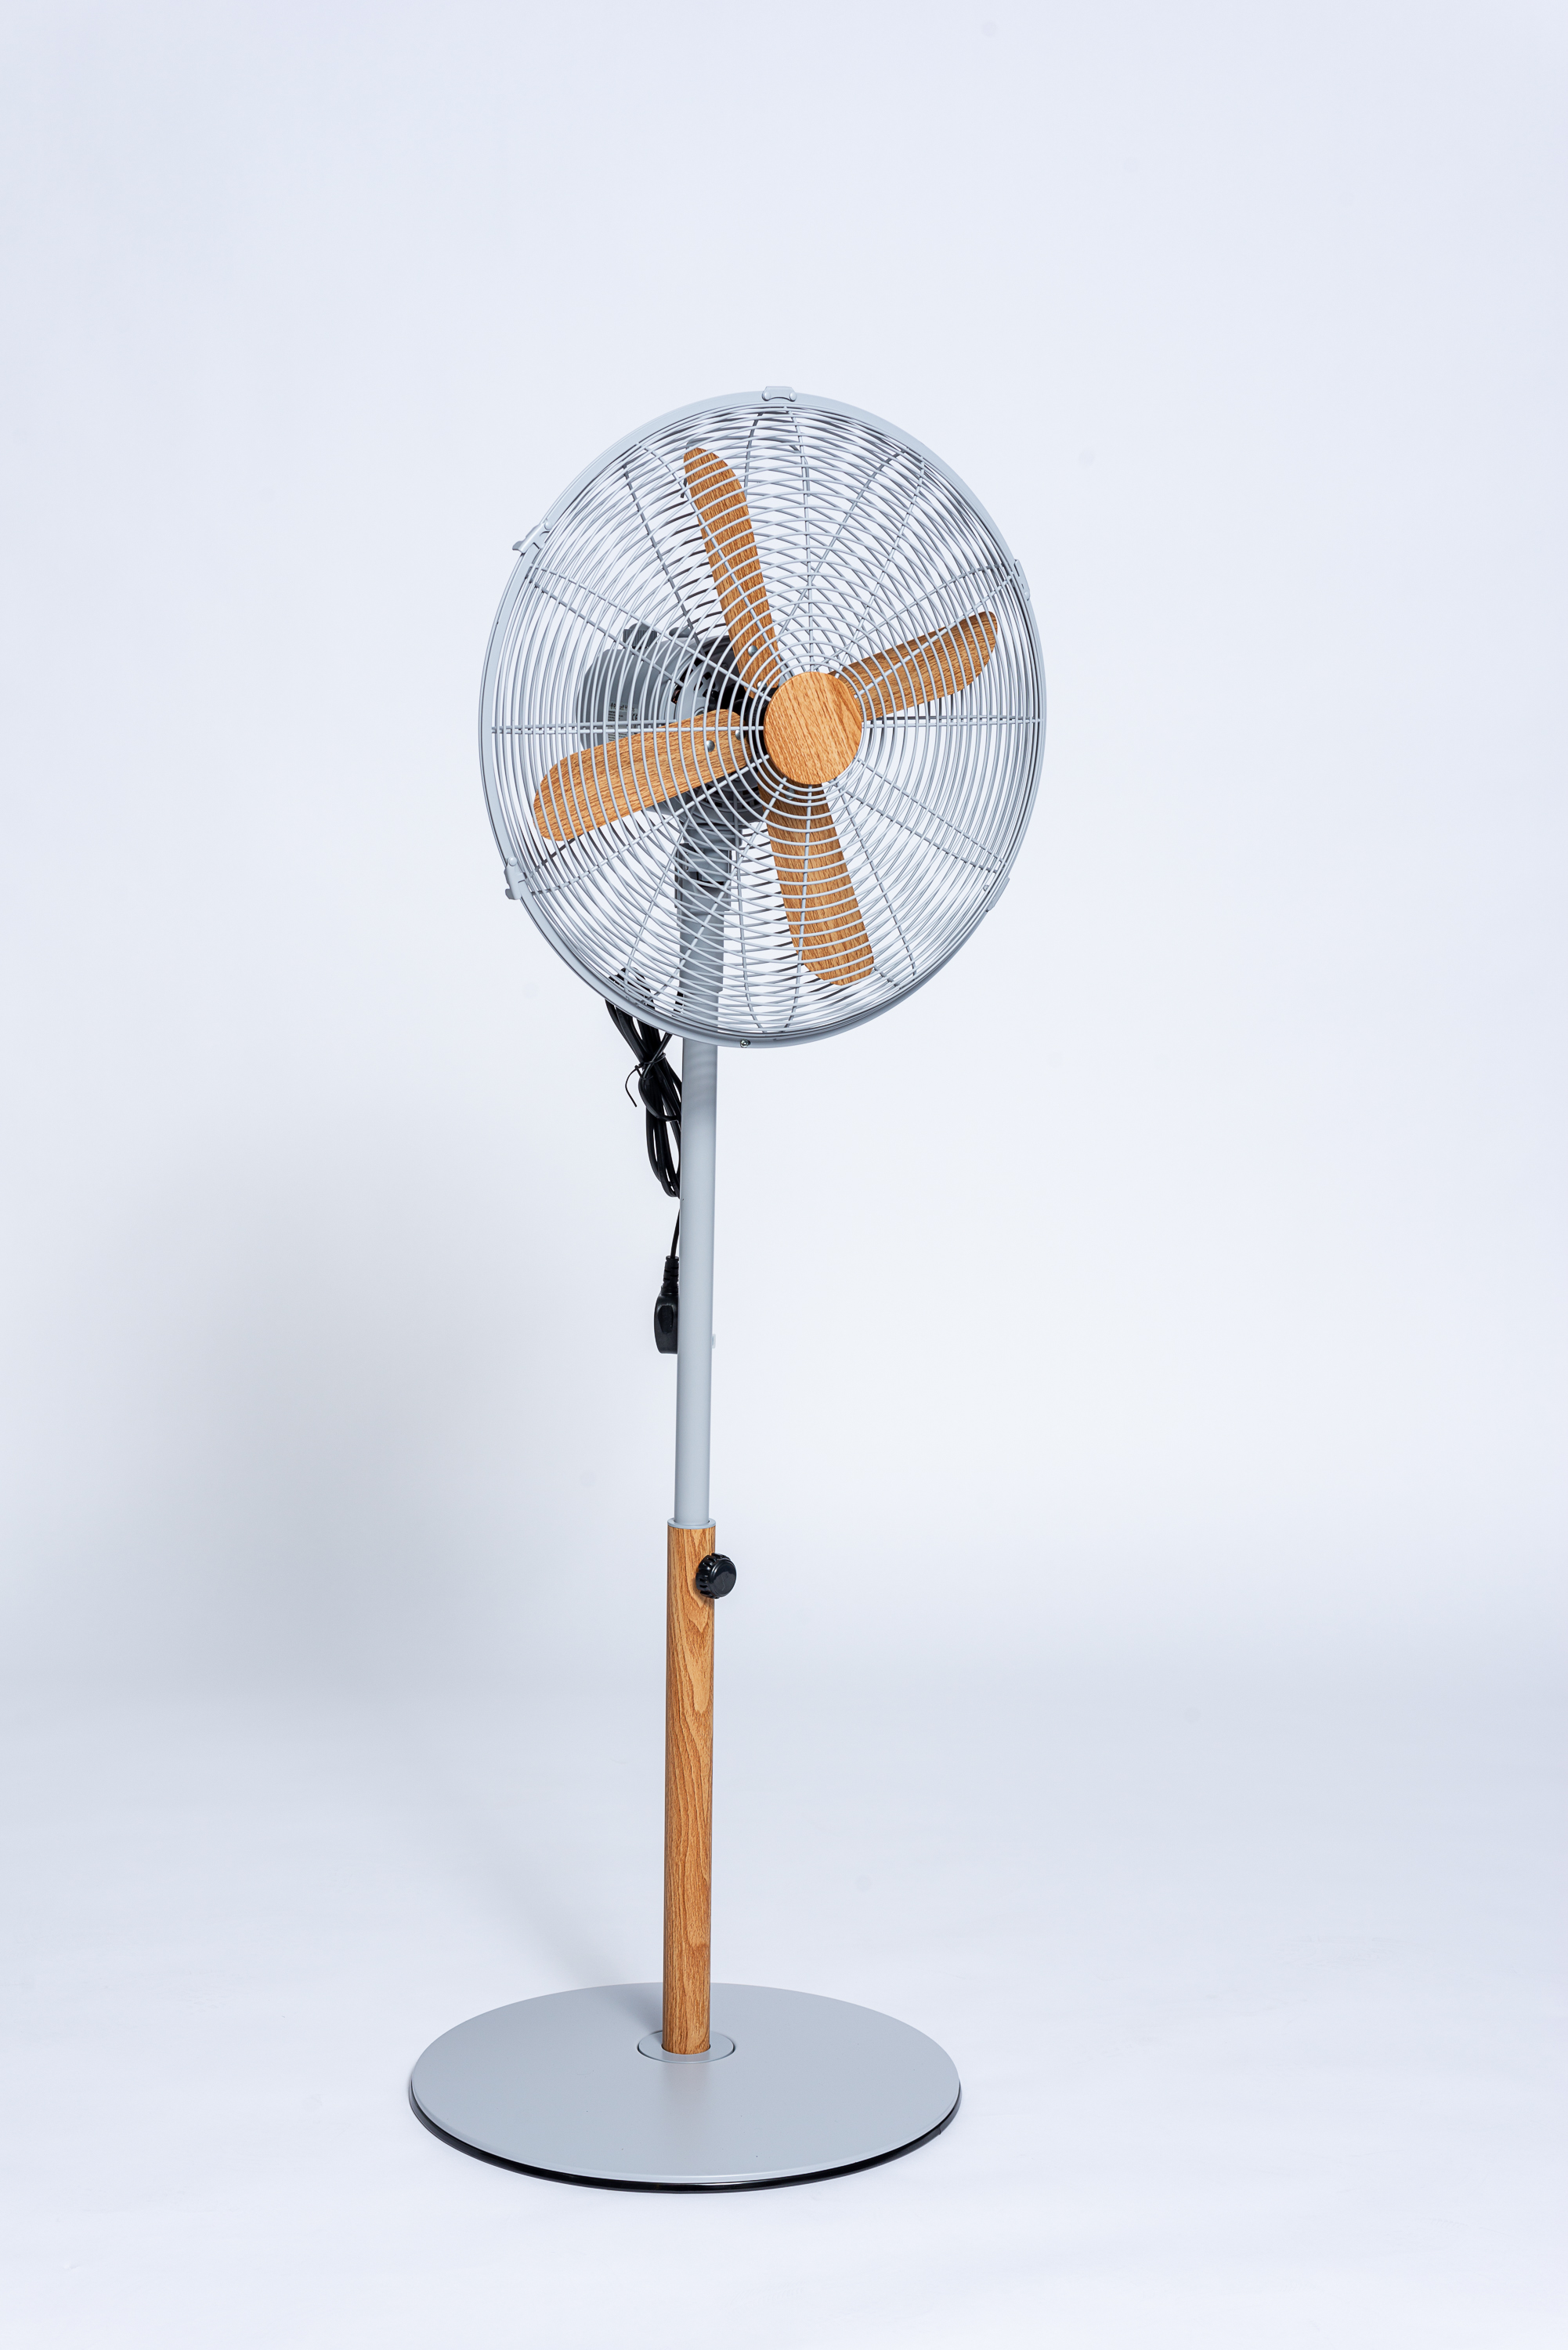 The Russell Hobbs 16 inch Scandi pedestal fan is stylish and practical